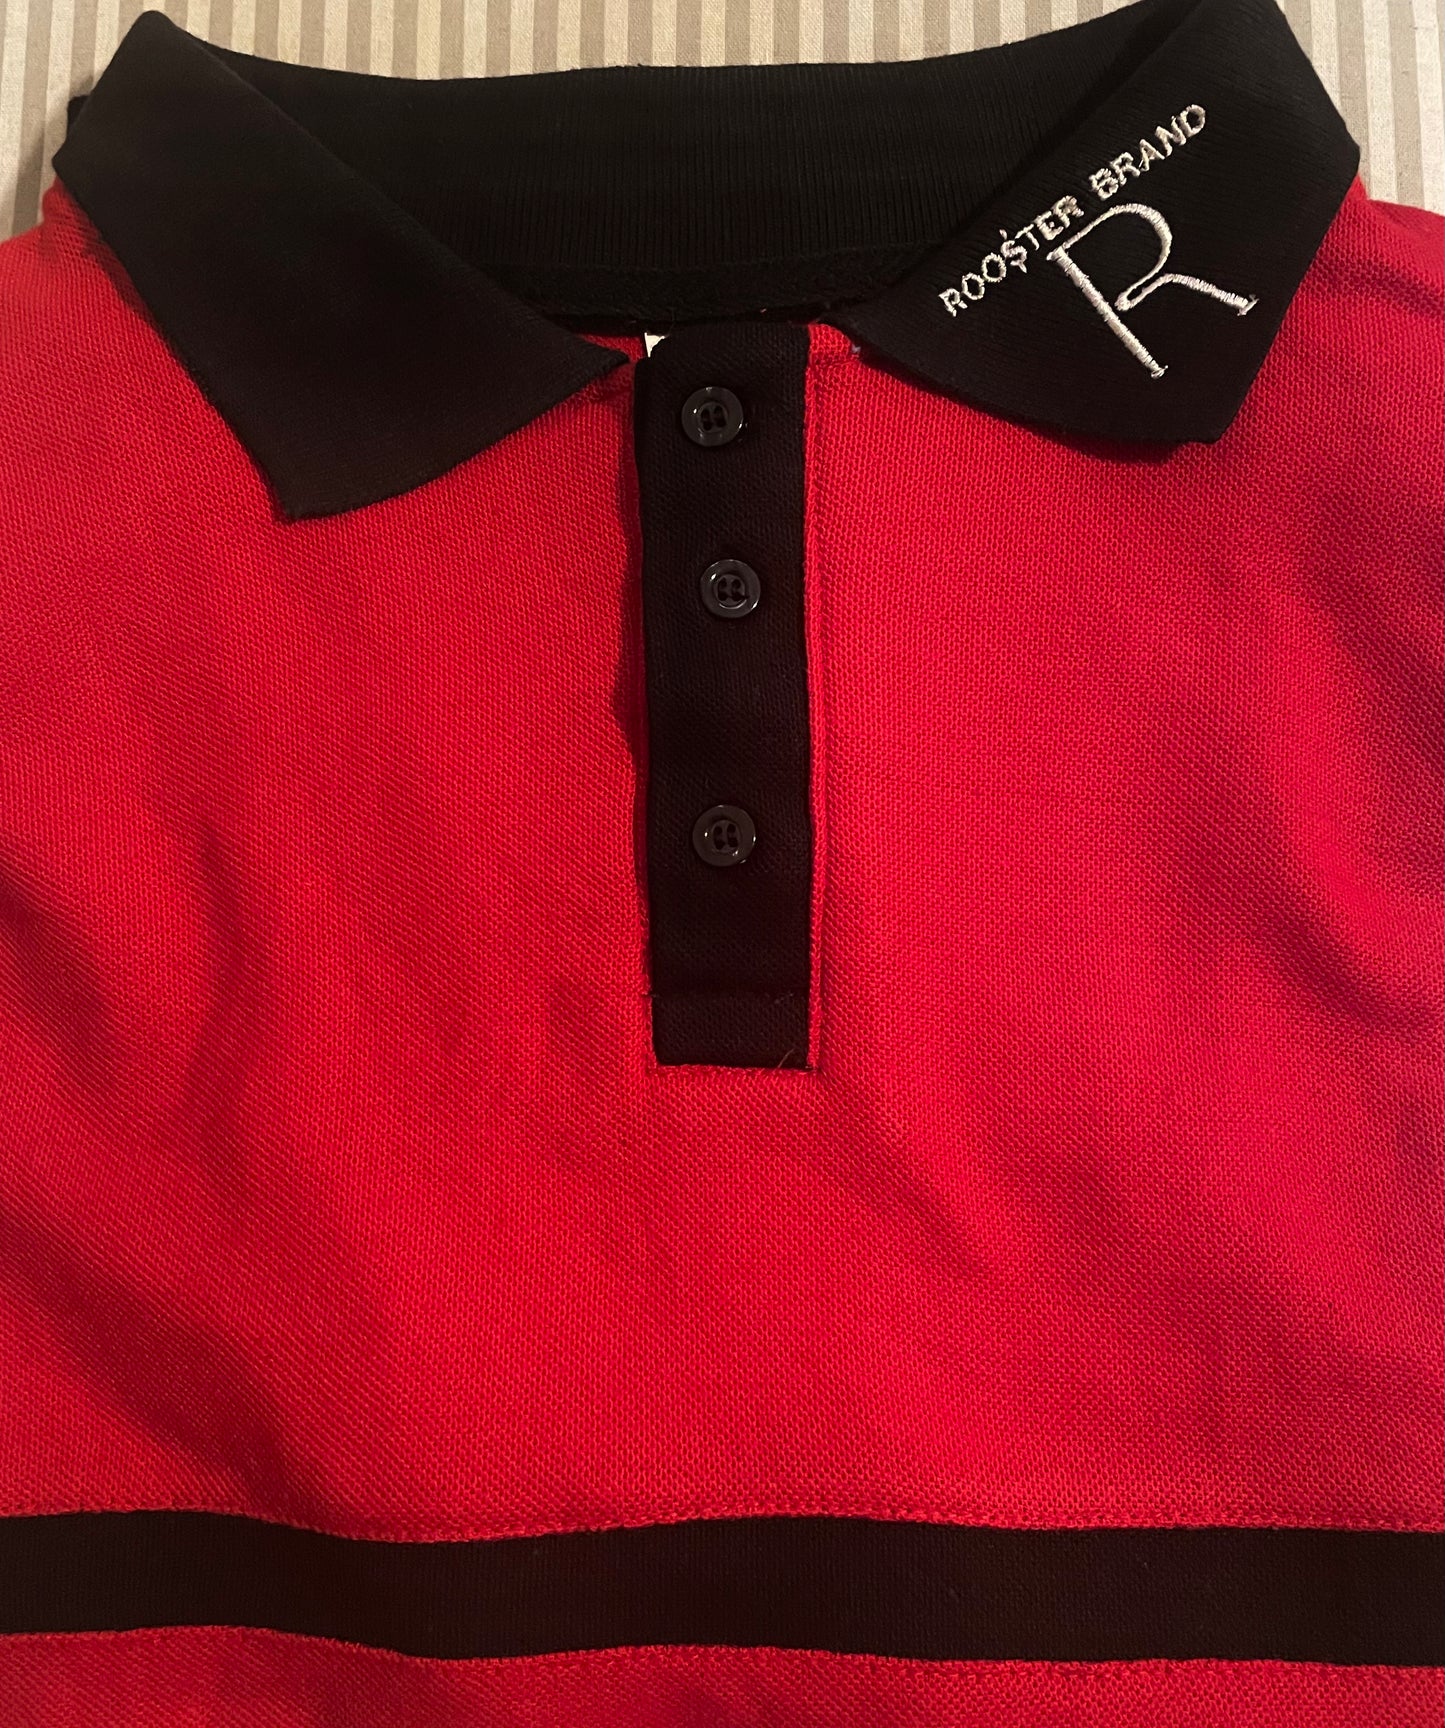 ** PROMO** just $12.99 Roo$ter Brand Custom Embroidered Logo Golf Polo Red/Blk Collar Logo